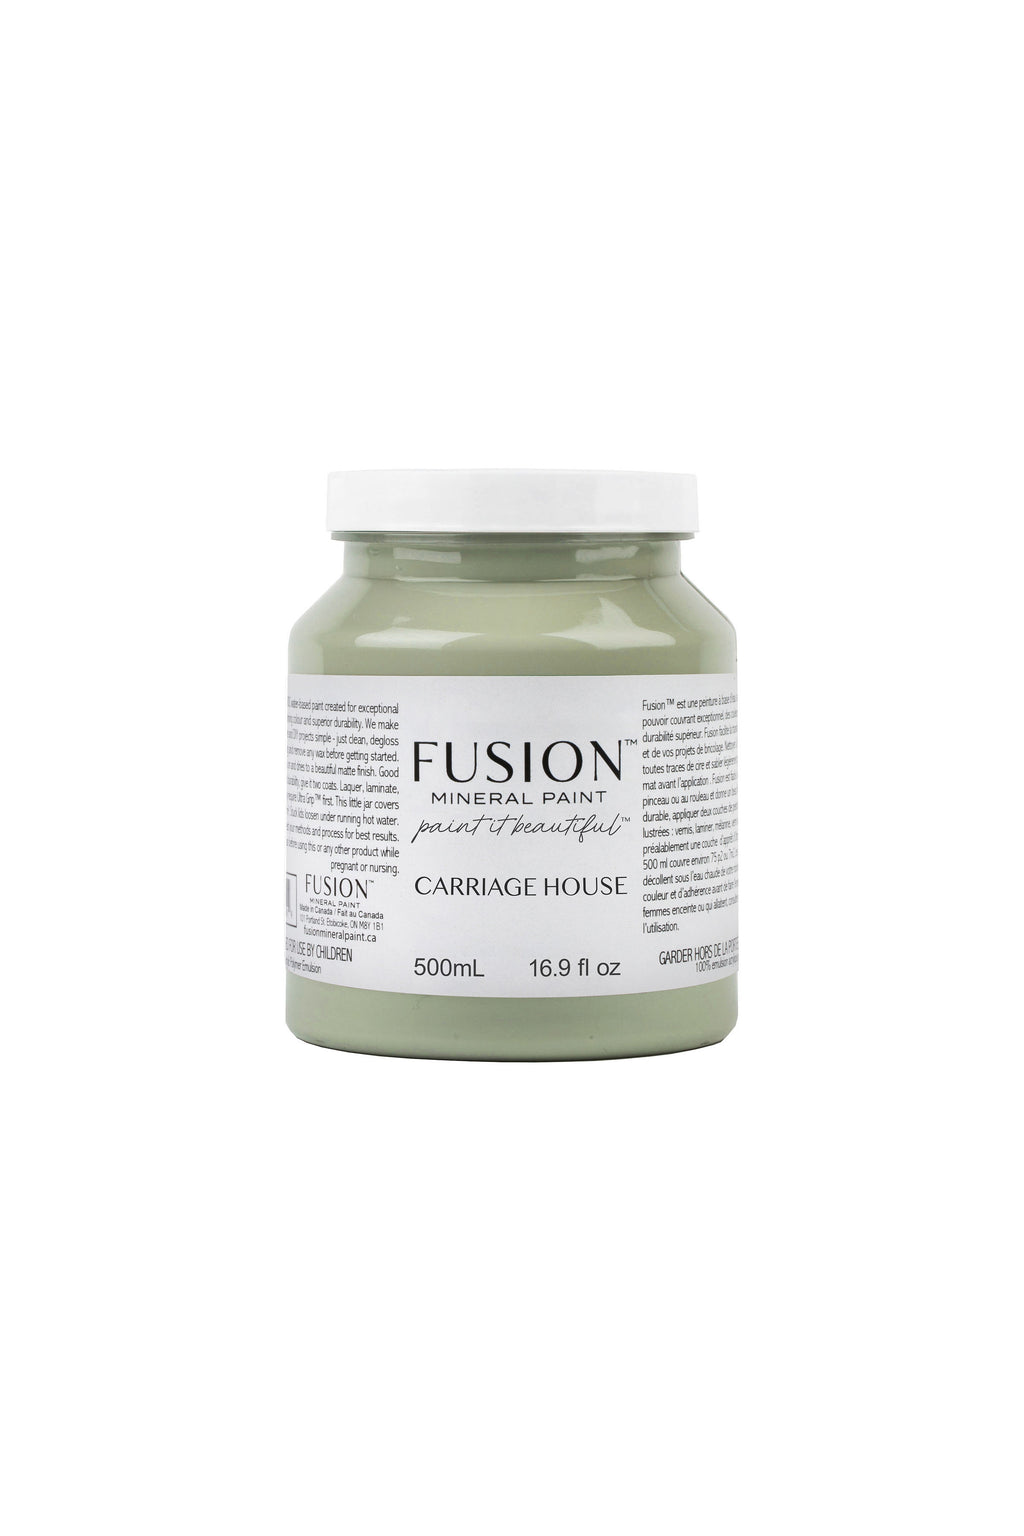 Carriage House Fusion Mineral Paint - Pint